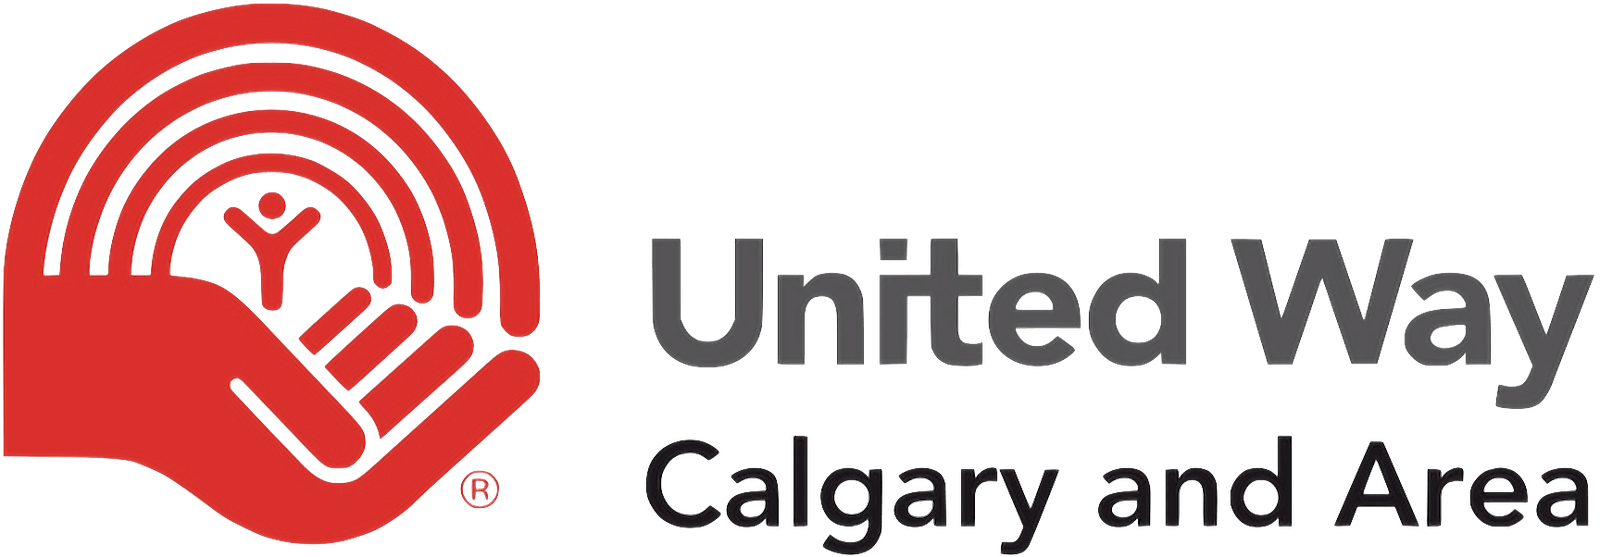 Logo for United Way of Calgary and Area on a transparent background